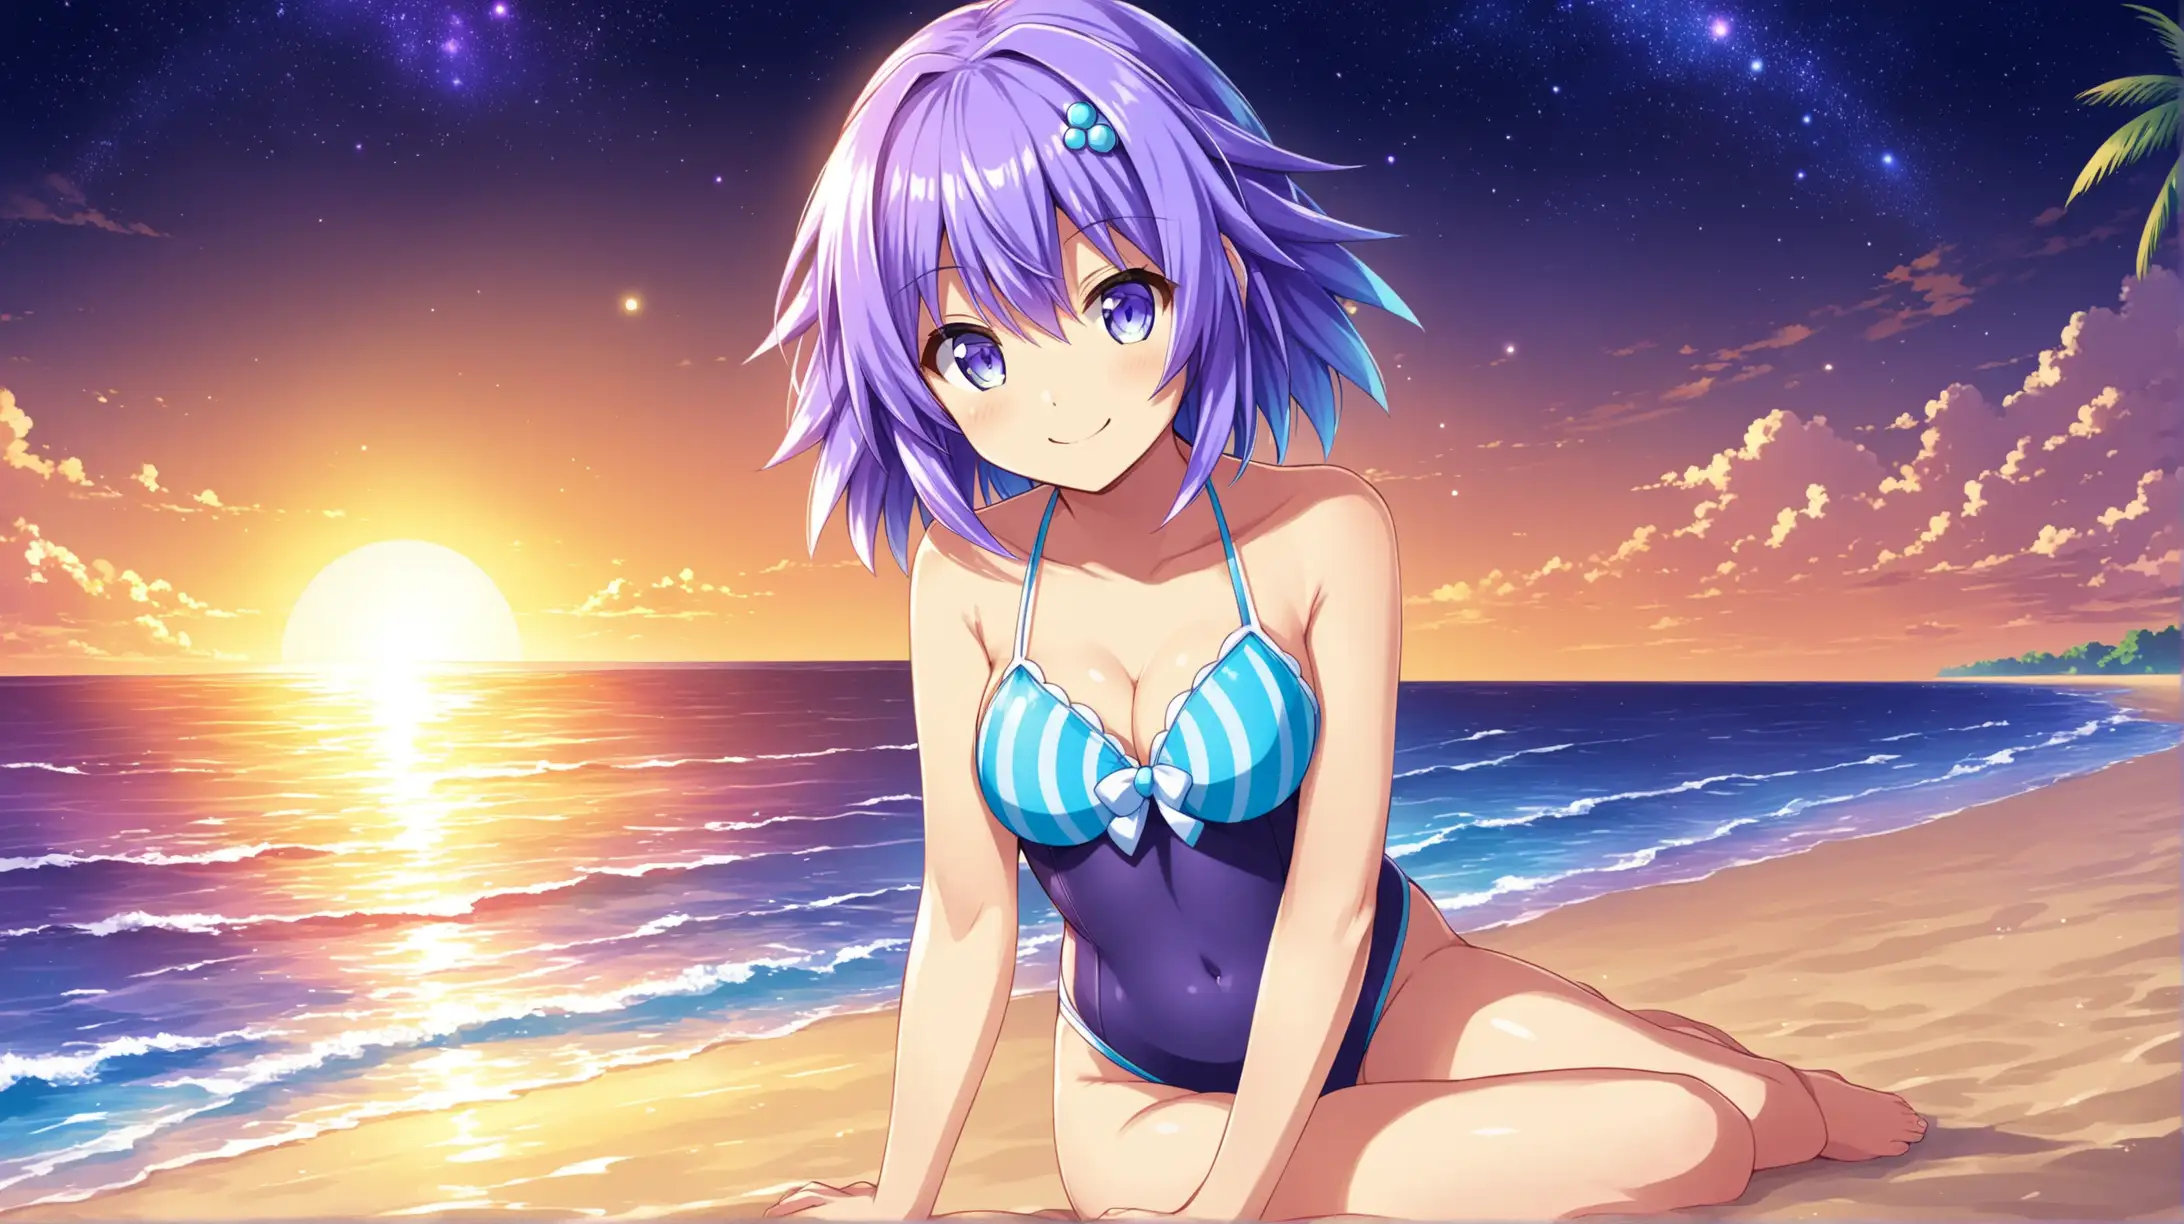 Draw the character Neptune from the Hyperdimension Neptunia series with short hair sitting at the beach alone at night while she is wearing a swimsuit and smiling at the viewer